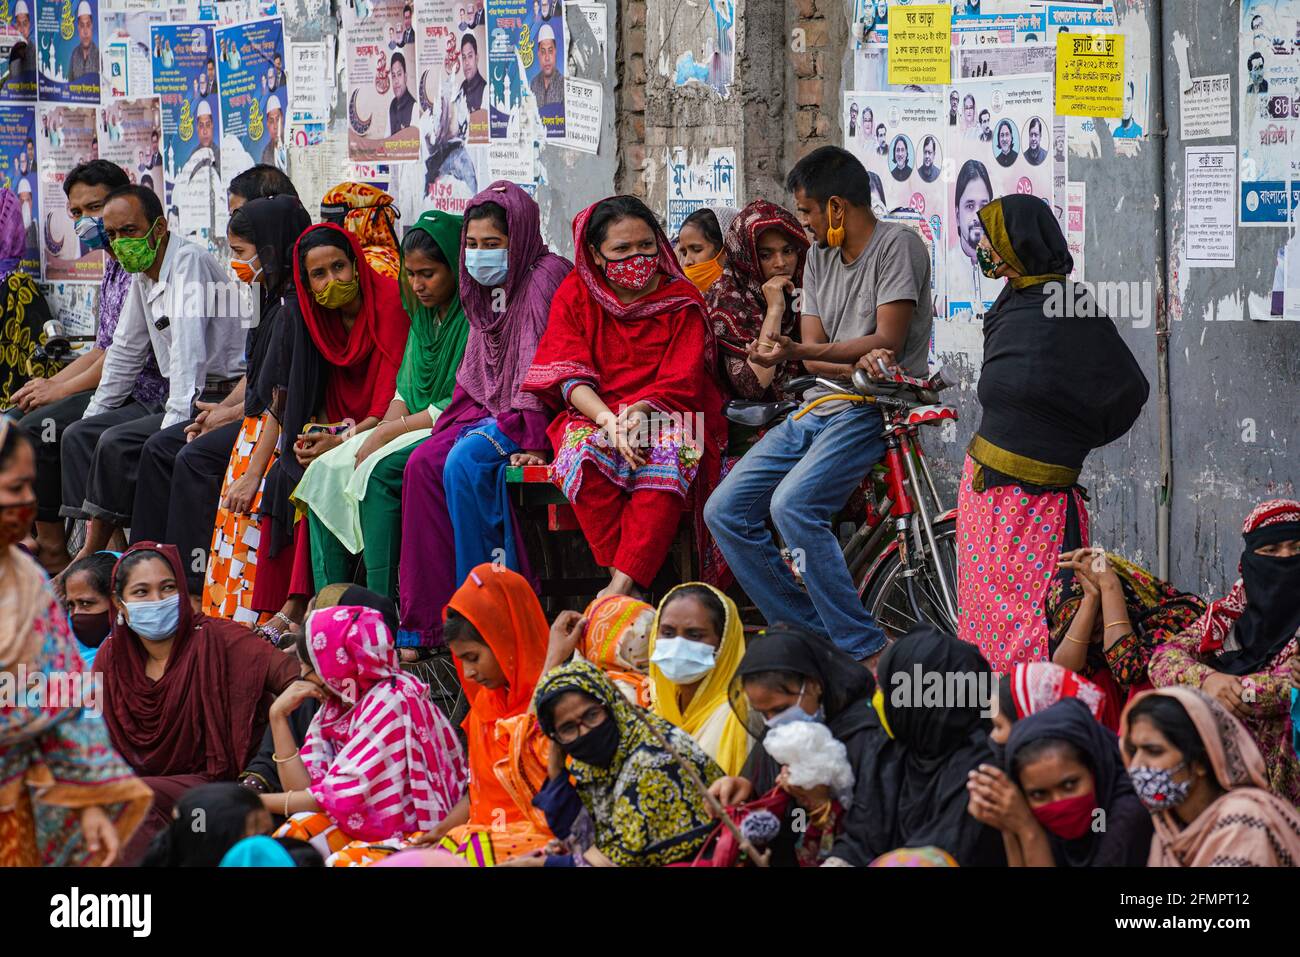 Dhaka, Bangladesh. 11th May, 2021. Garment workers of Binni Garments Ltd block the road at the factory demanding payment of due wages and Eid bonus. (Photo by Zabed Hasnain Chowdhury/SOPA Images/Sipa USA) Credit: Sipa USA/Alamy Live News Stock Photo